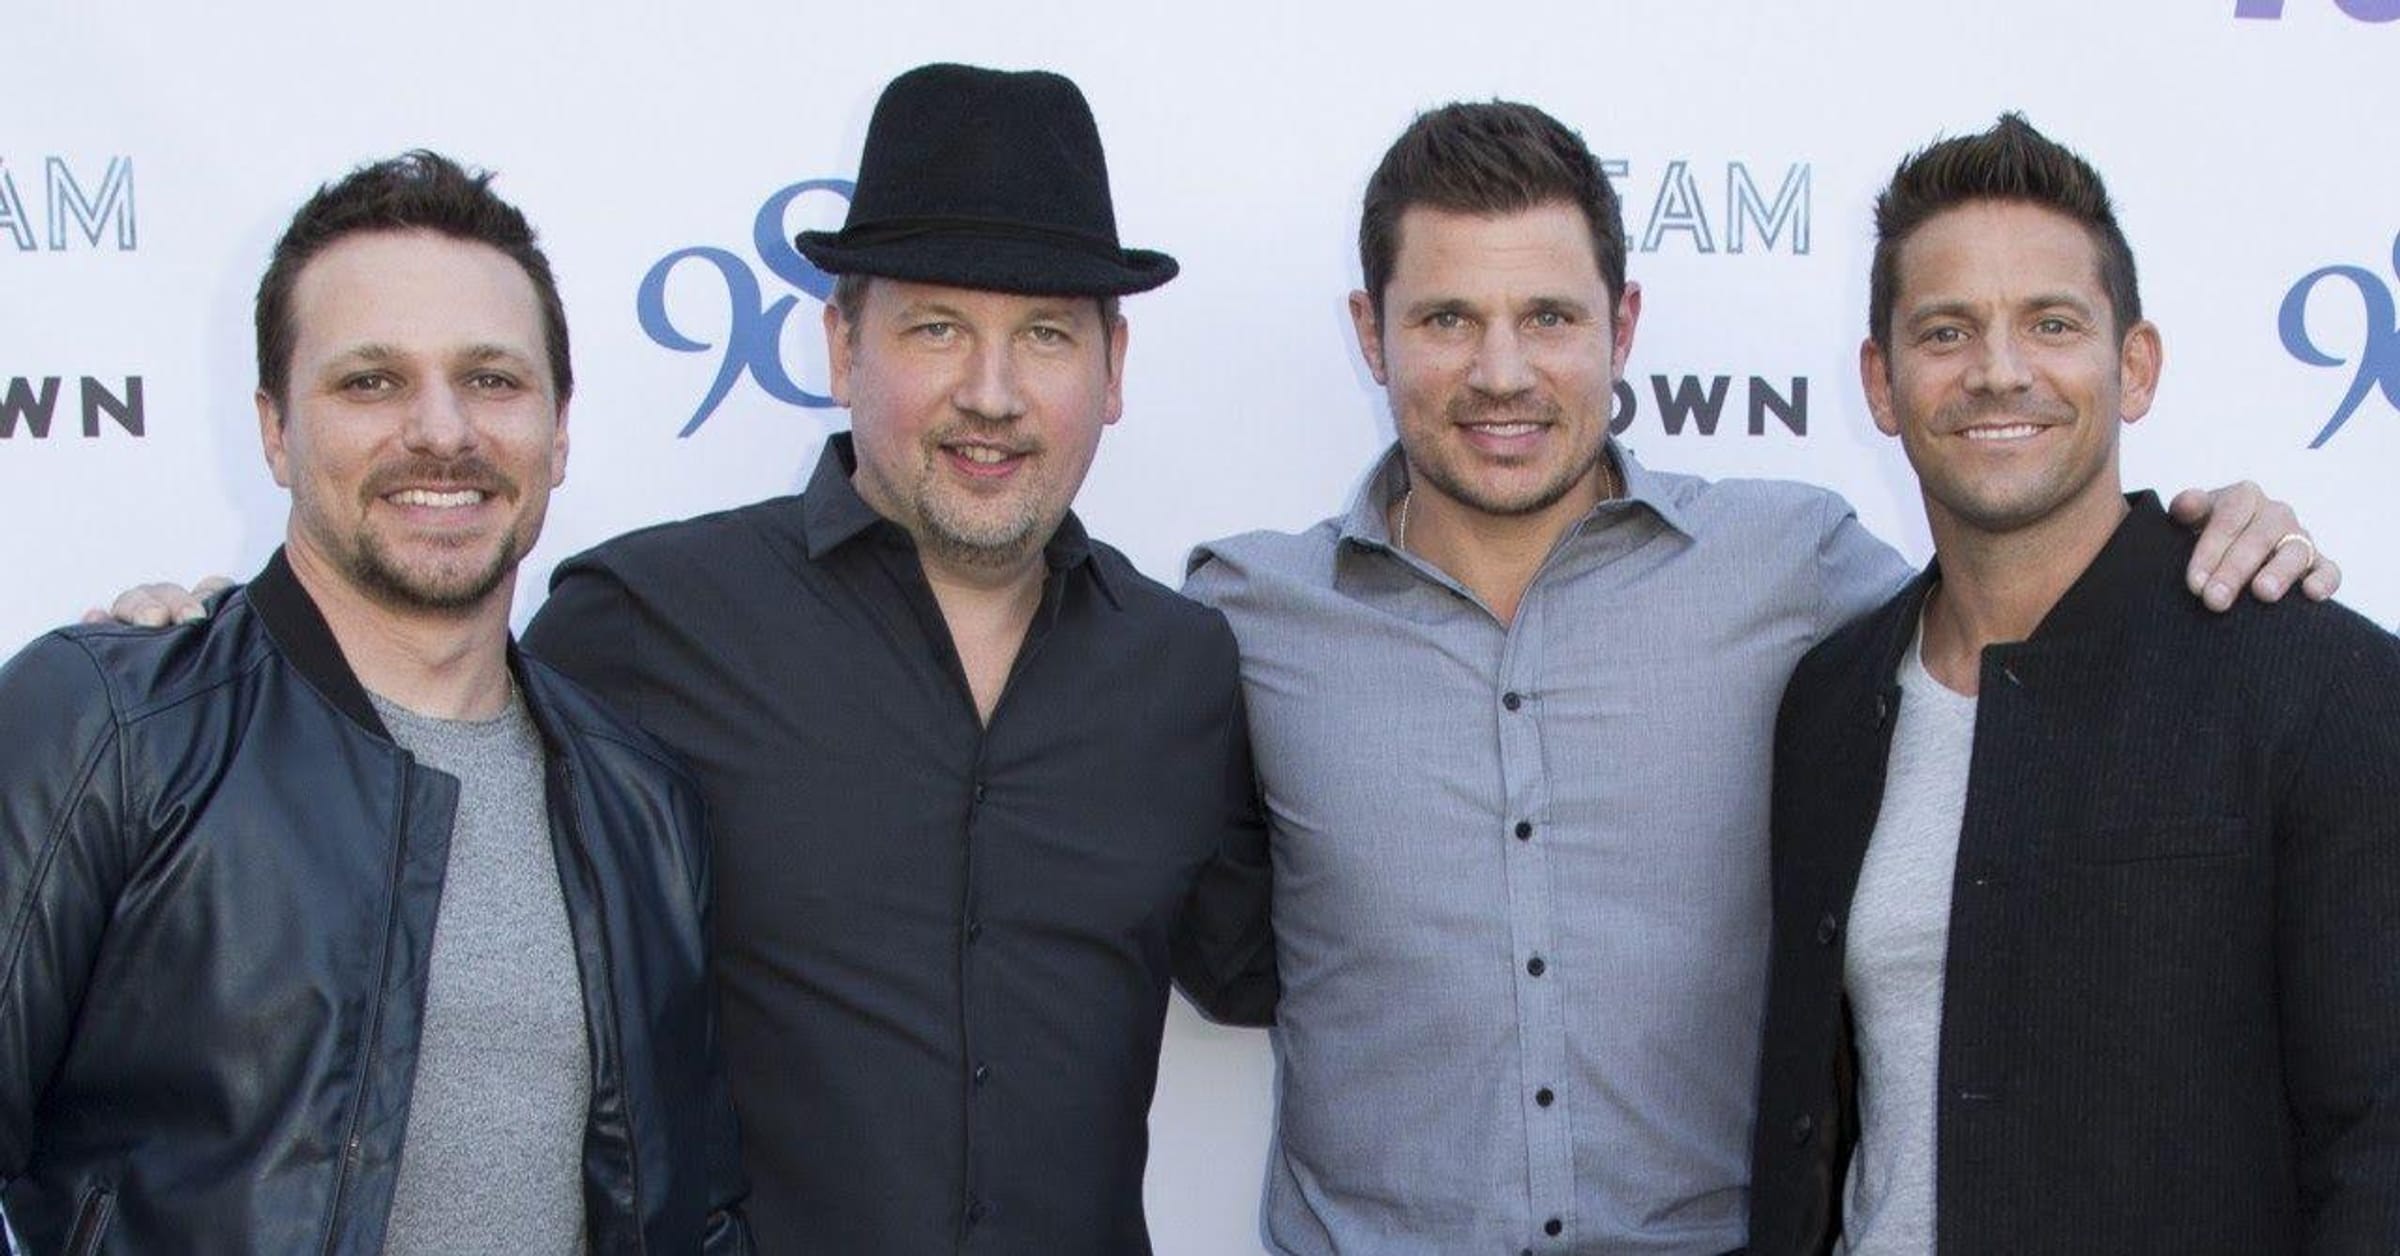 1990s boy band 98 Degrees reuniting for one concert